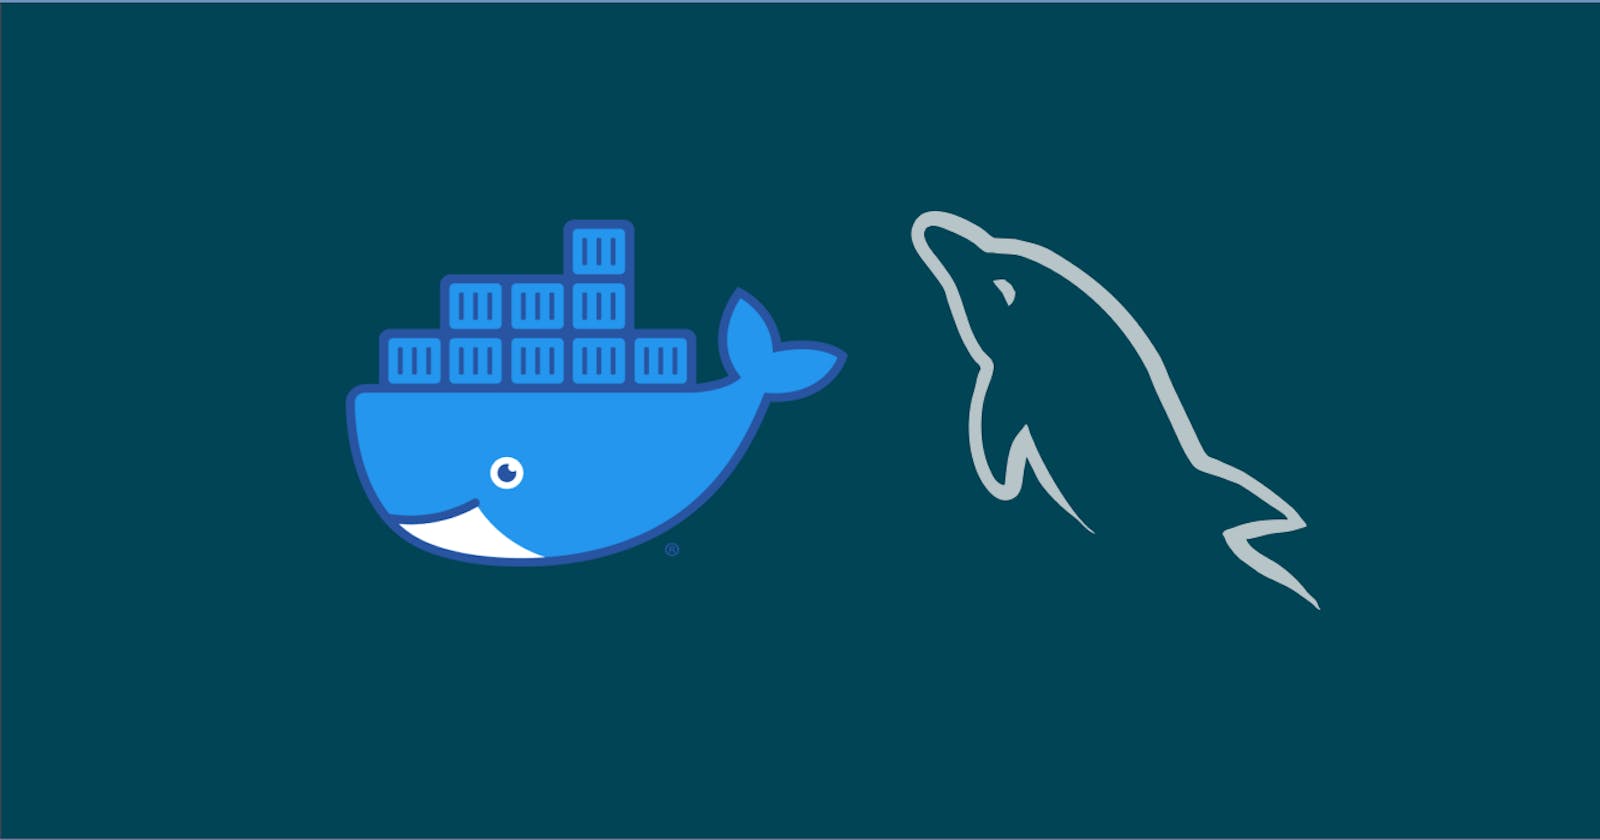 How to run a MySQL server in a Docker container and connect to it from the host machine?